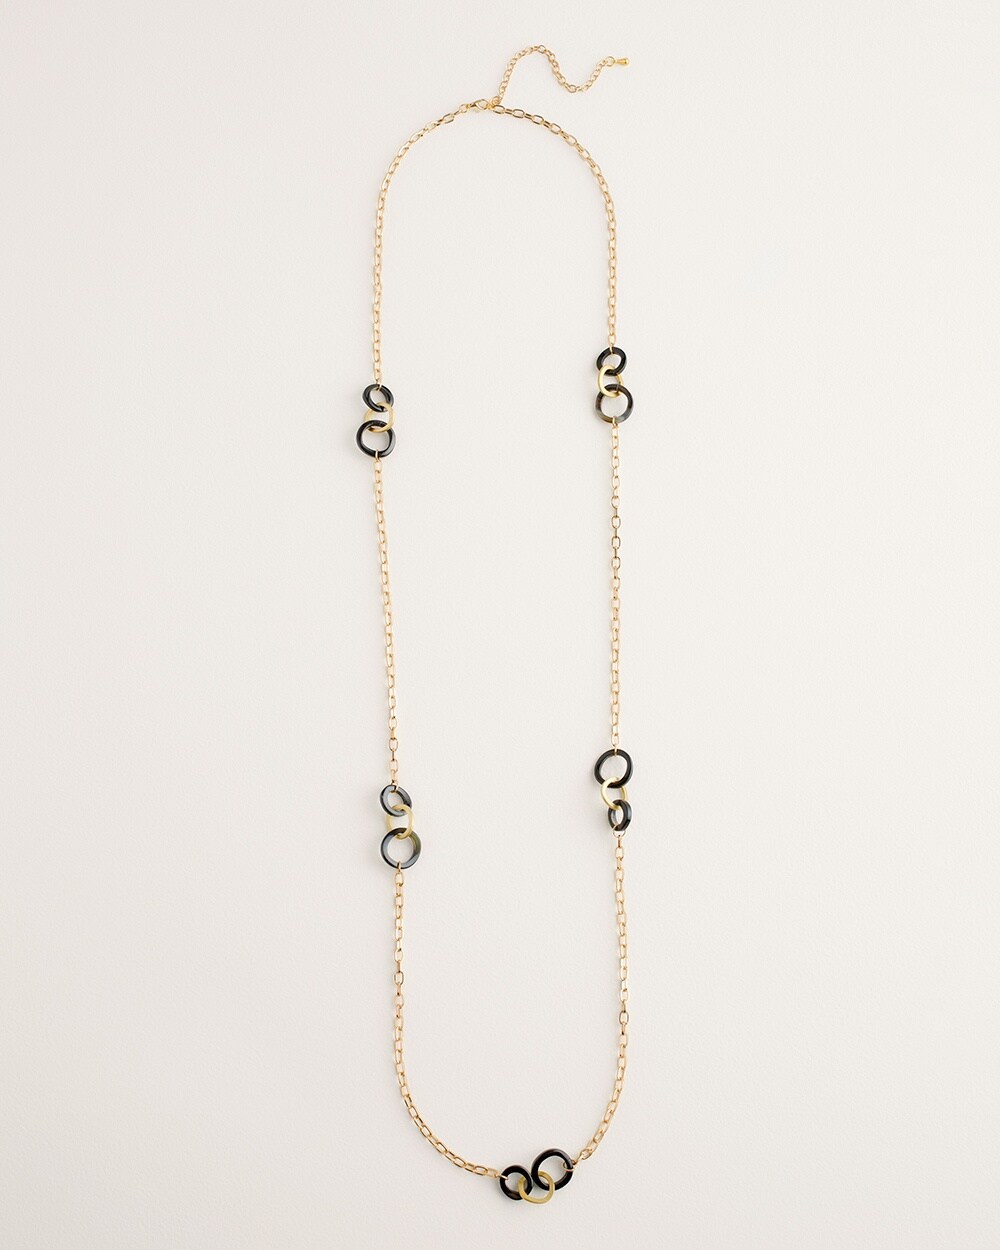 Horn and Goldtone Single-Strand Necklace